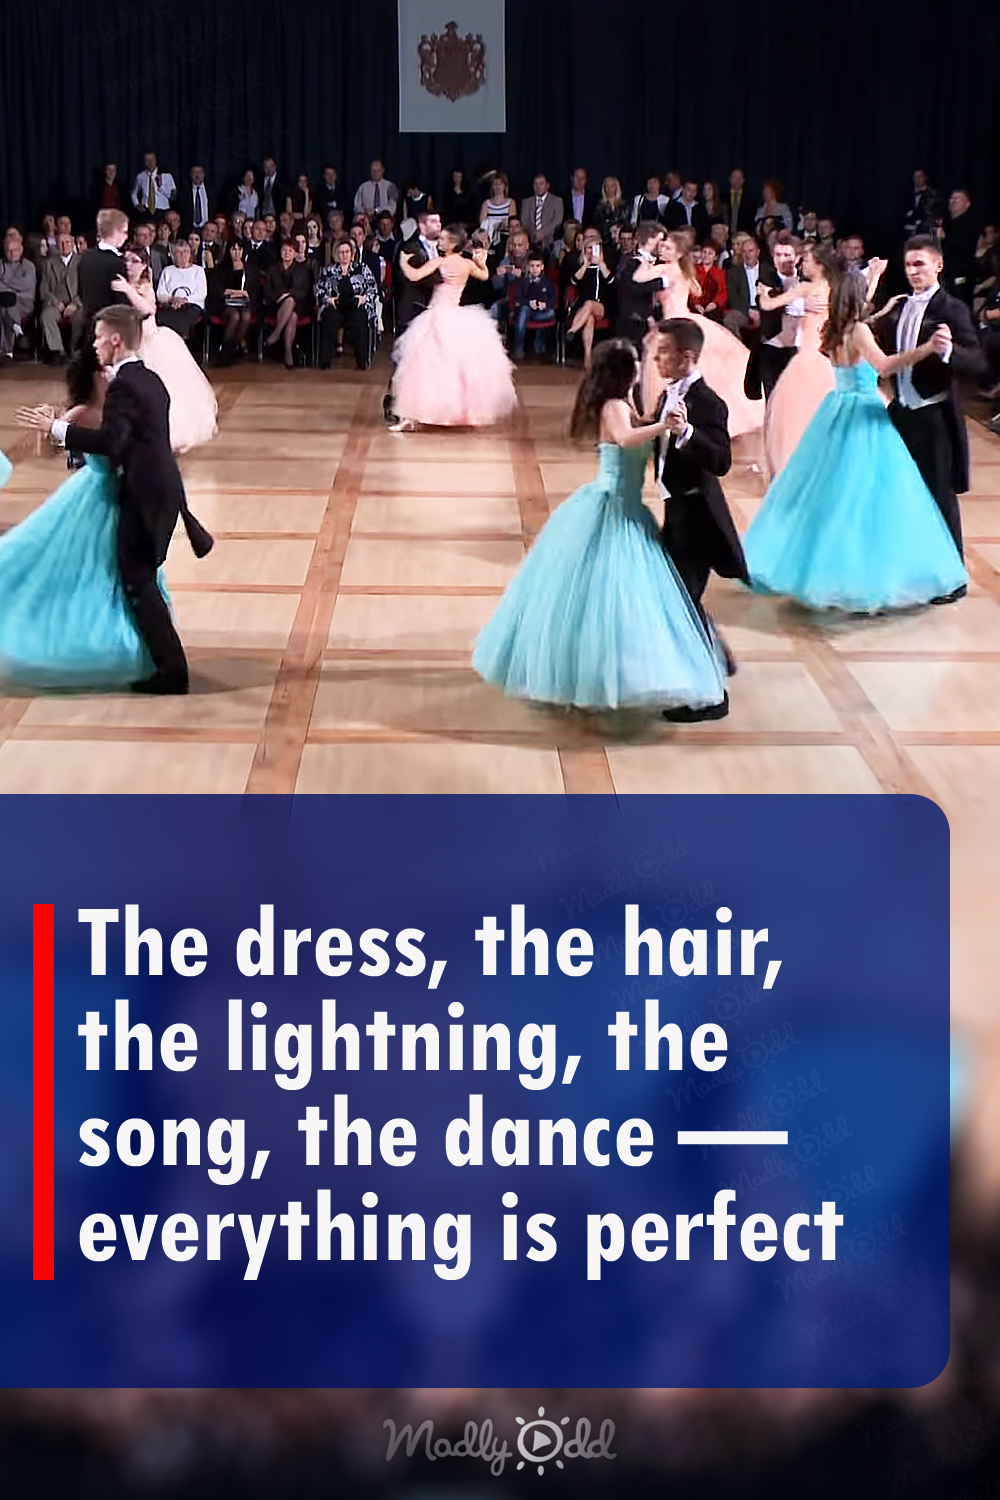 The dress, the hair, the lightning, the song, the dance — everything is perfect